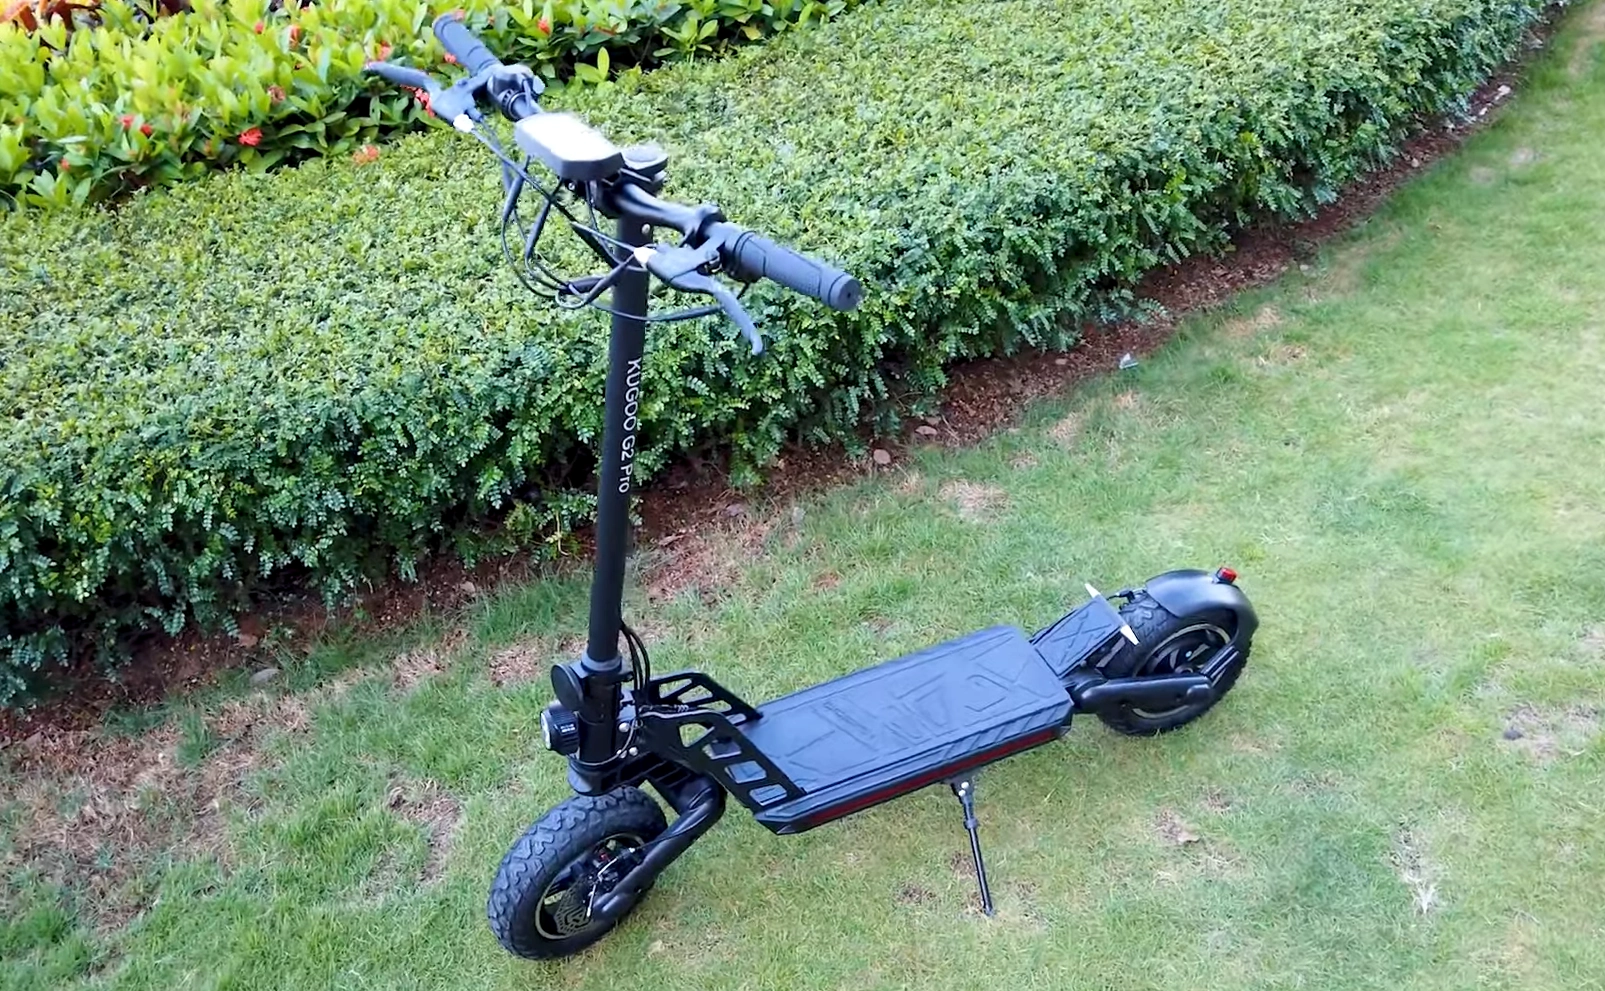 Kugoo G2 Pro electric scooter